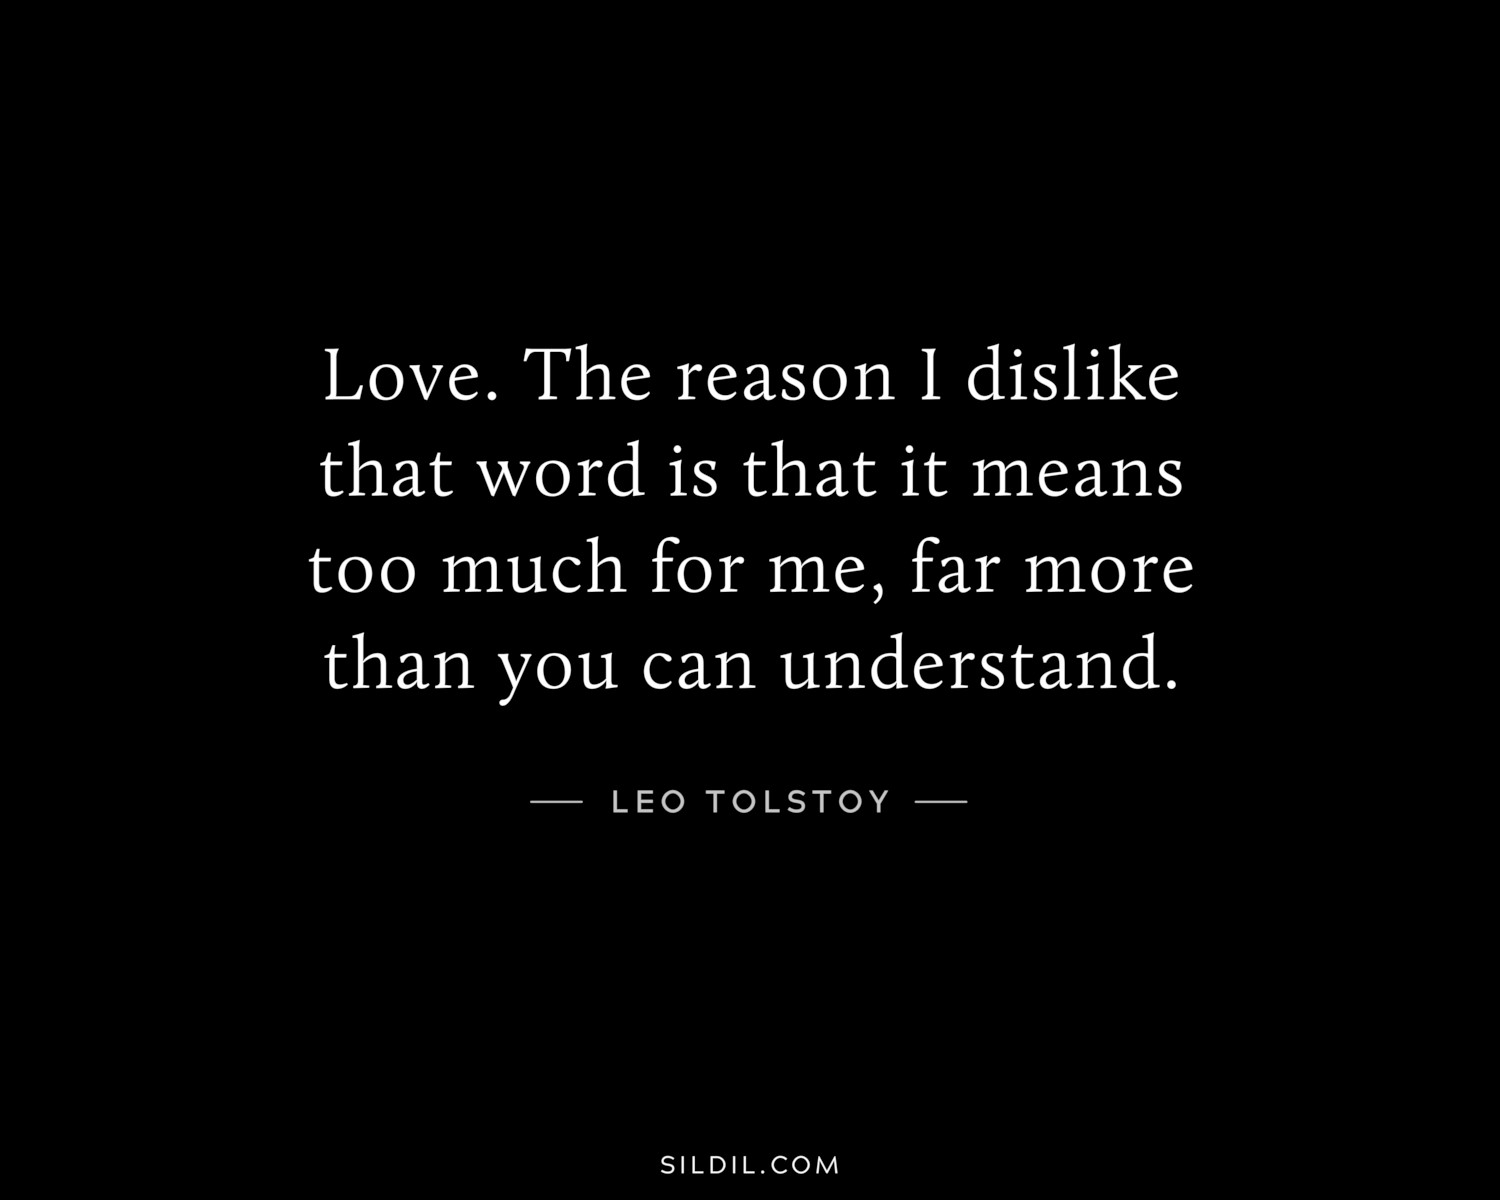 Love. The reason I dislike that word is that it means too much for me, far more than you can understand.